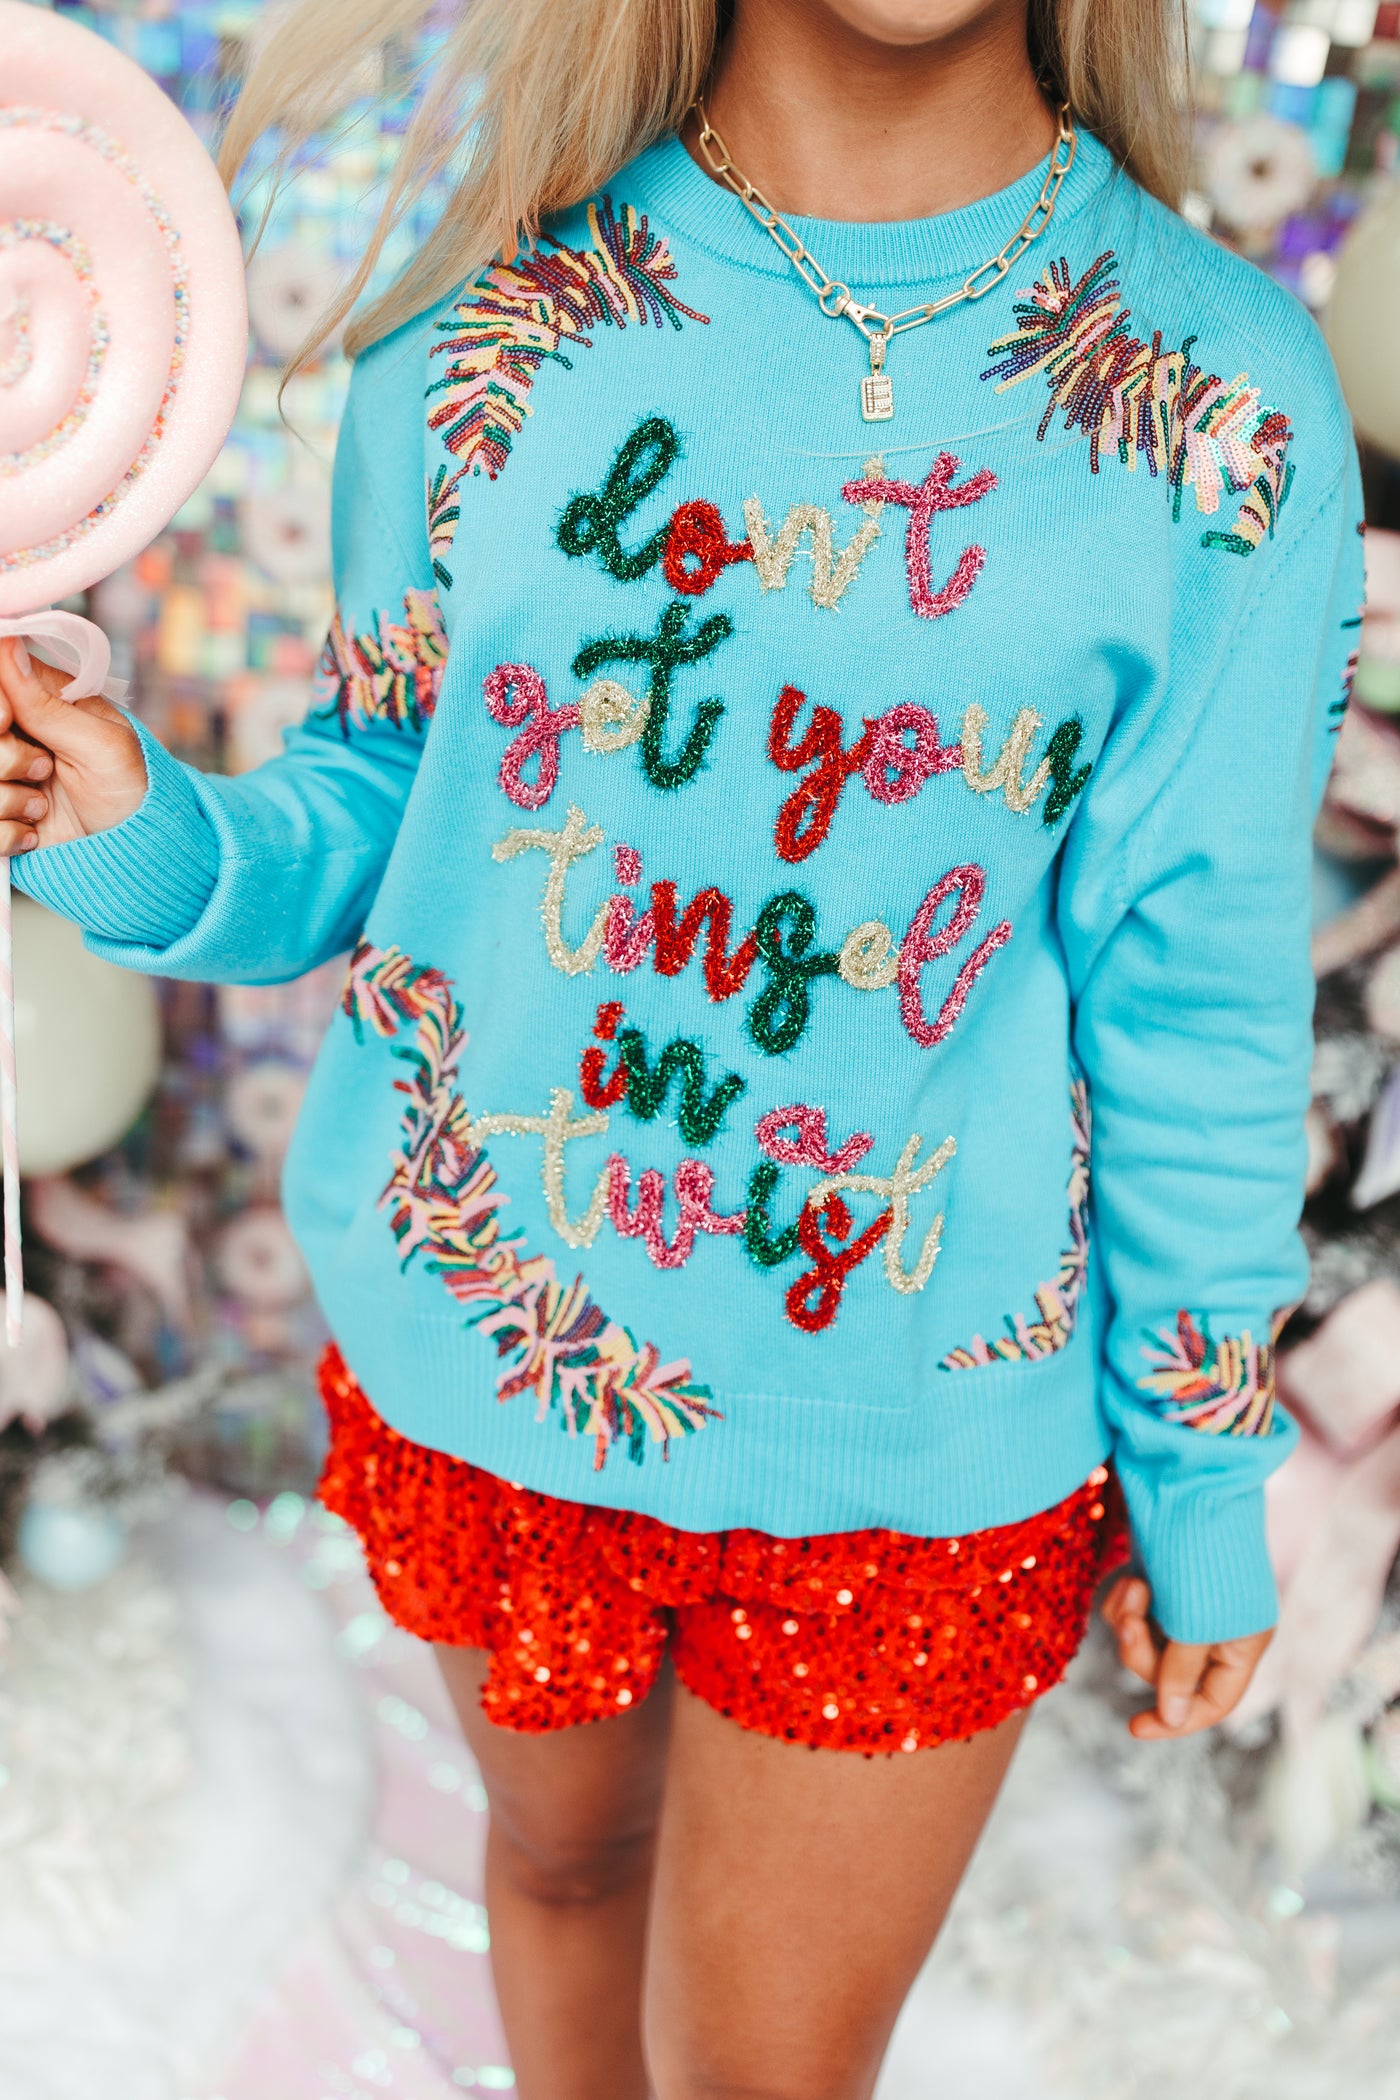 Queen Of Sparkles Aqua 'Don't Get Your Tinsel In a Twist" Sweater